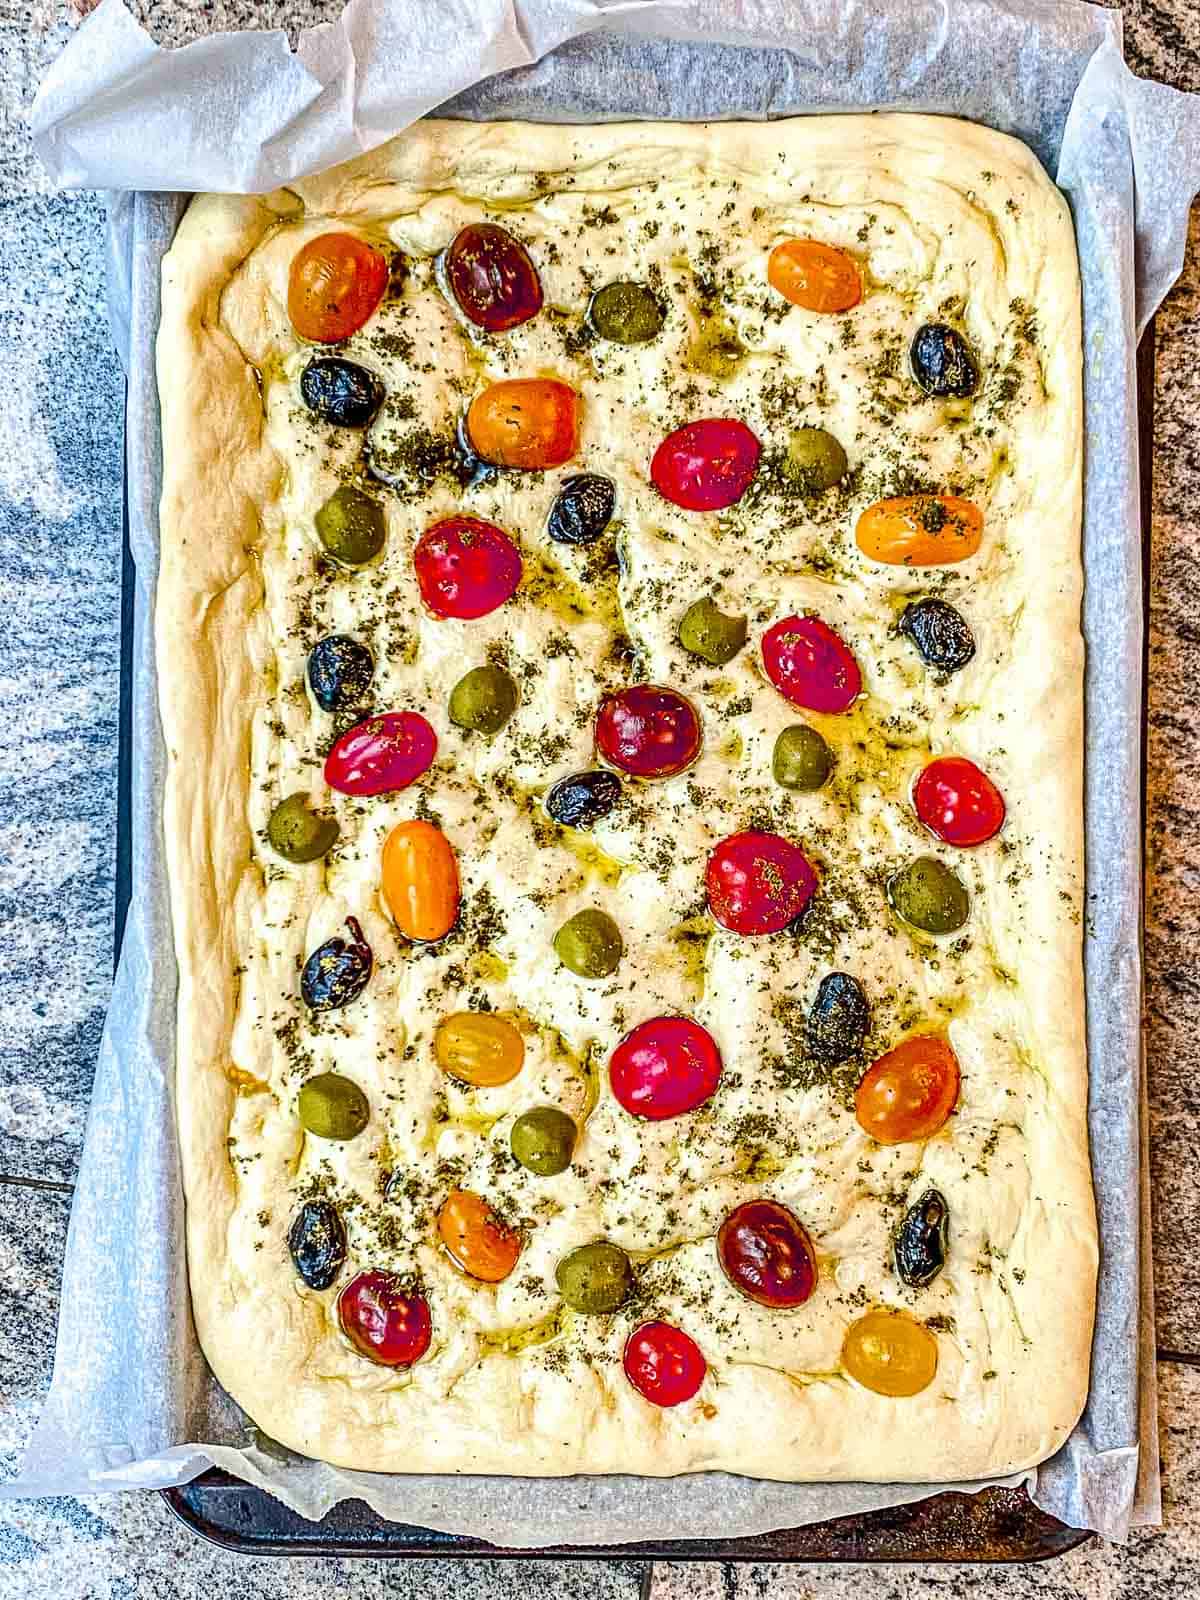 Focaccia bread dough with all of the toppings on top ready to be placed in the oven